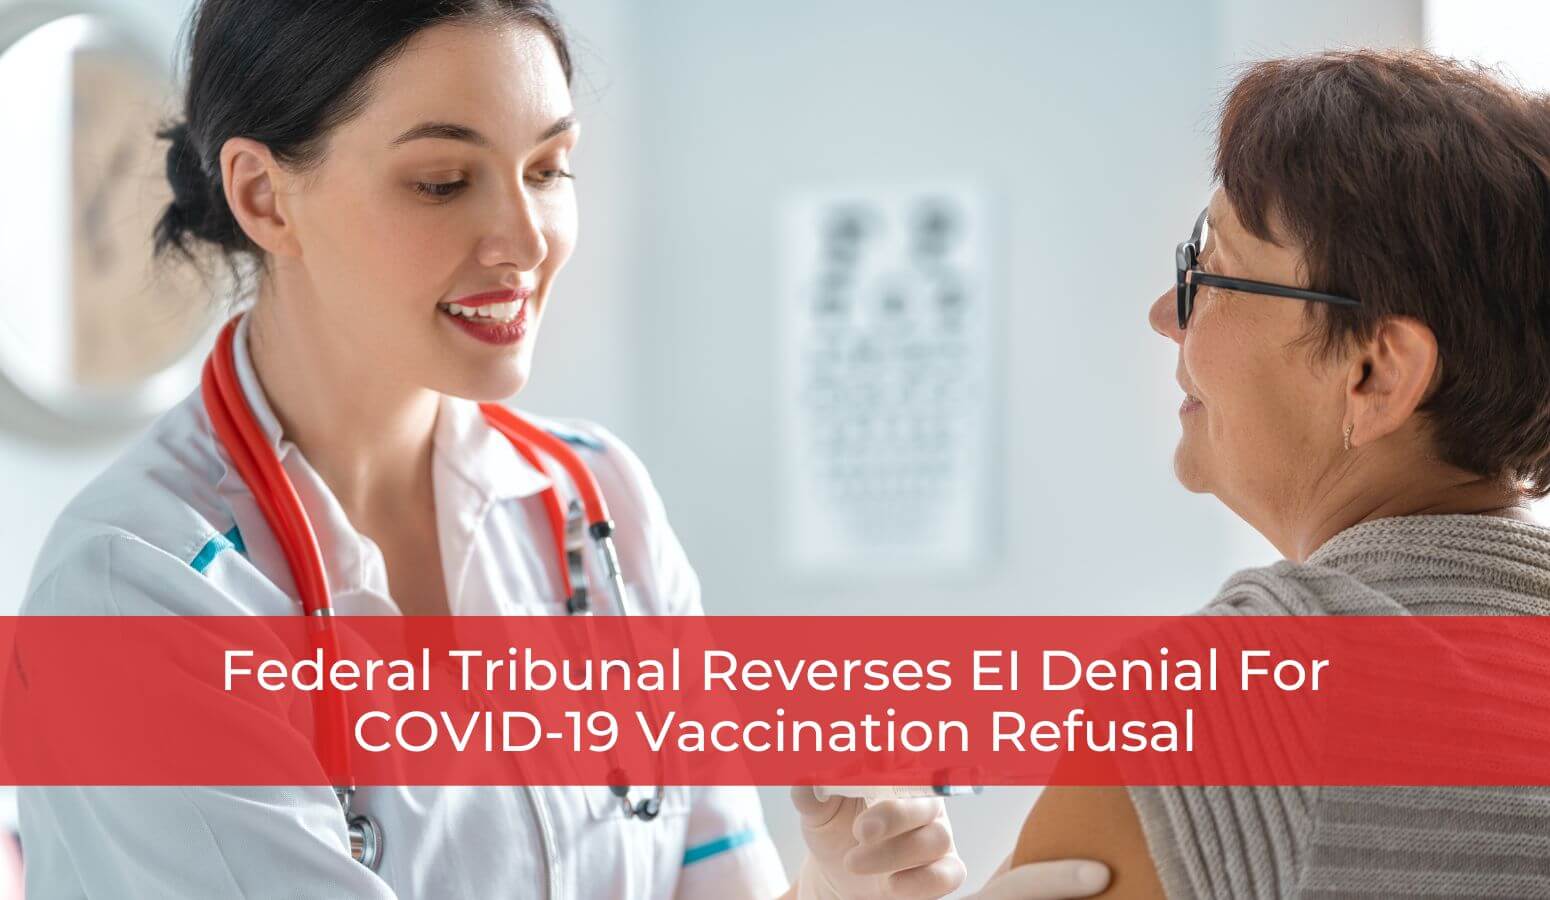 Featured image for “Federal Tribunal Reverses EI Denial For COVID-19 Vaccination Refusal”